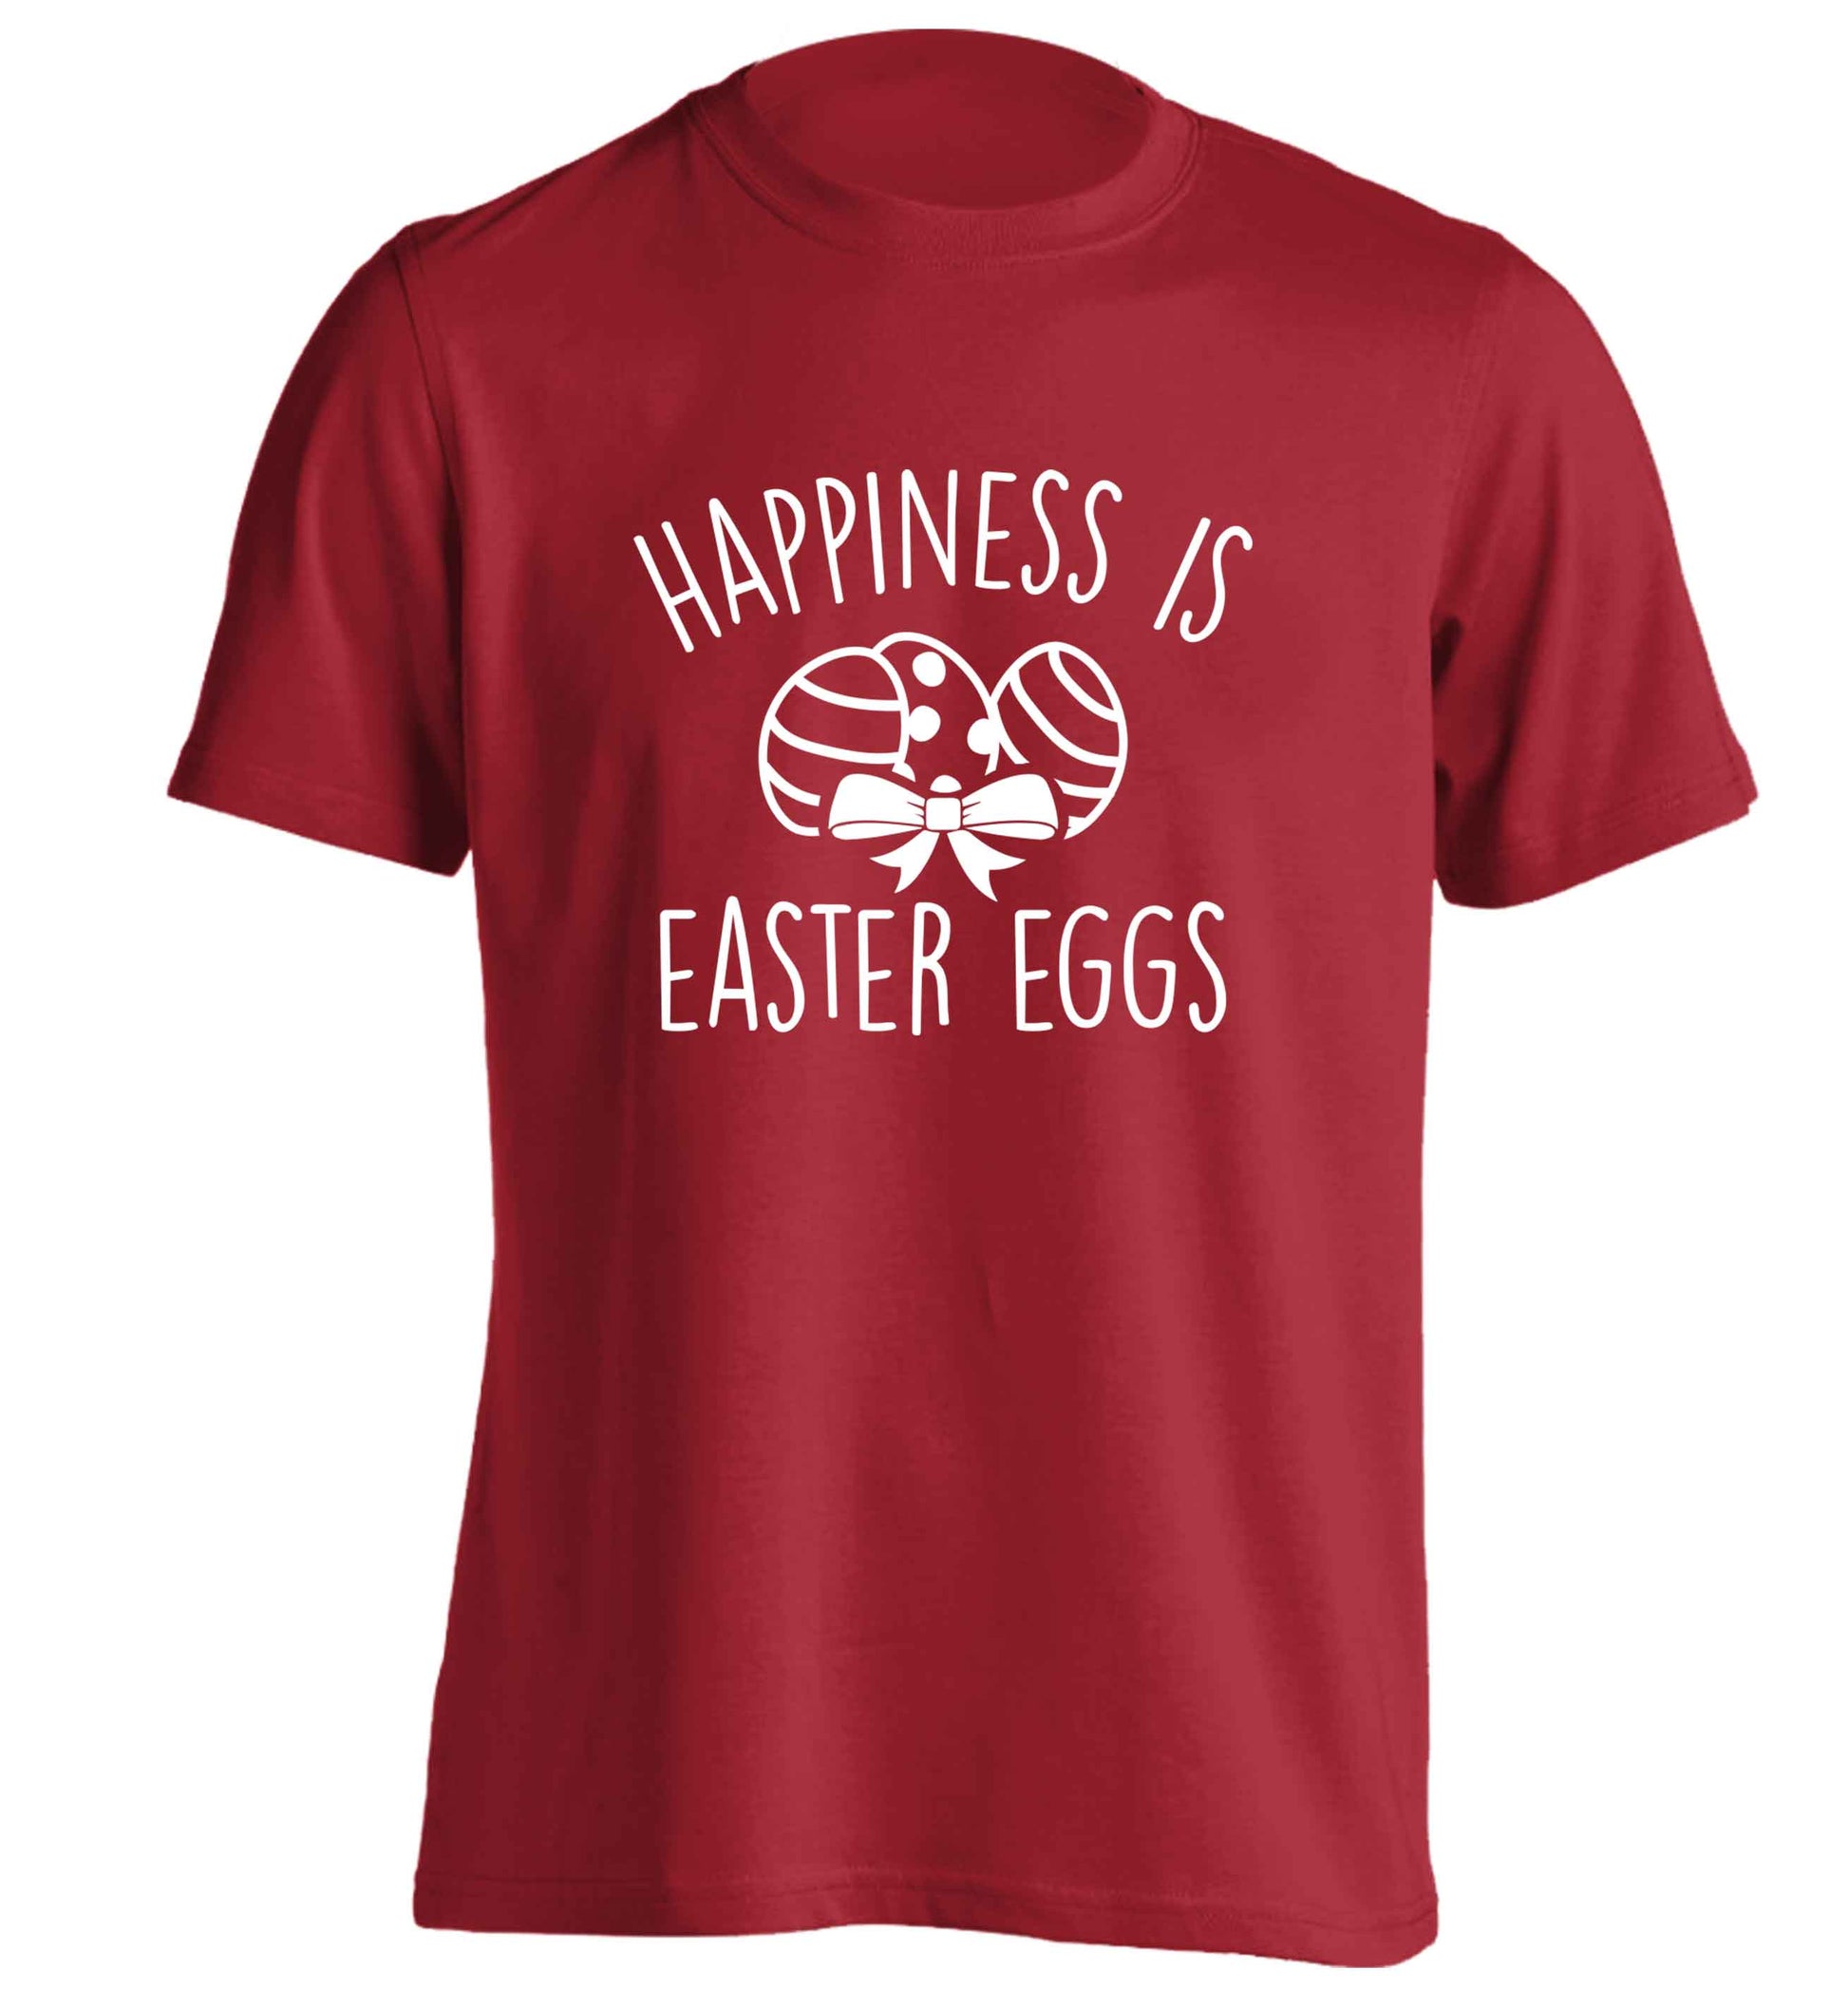 Happiness is Easter eggs adults unisex red Tshirt 2XL